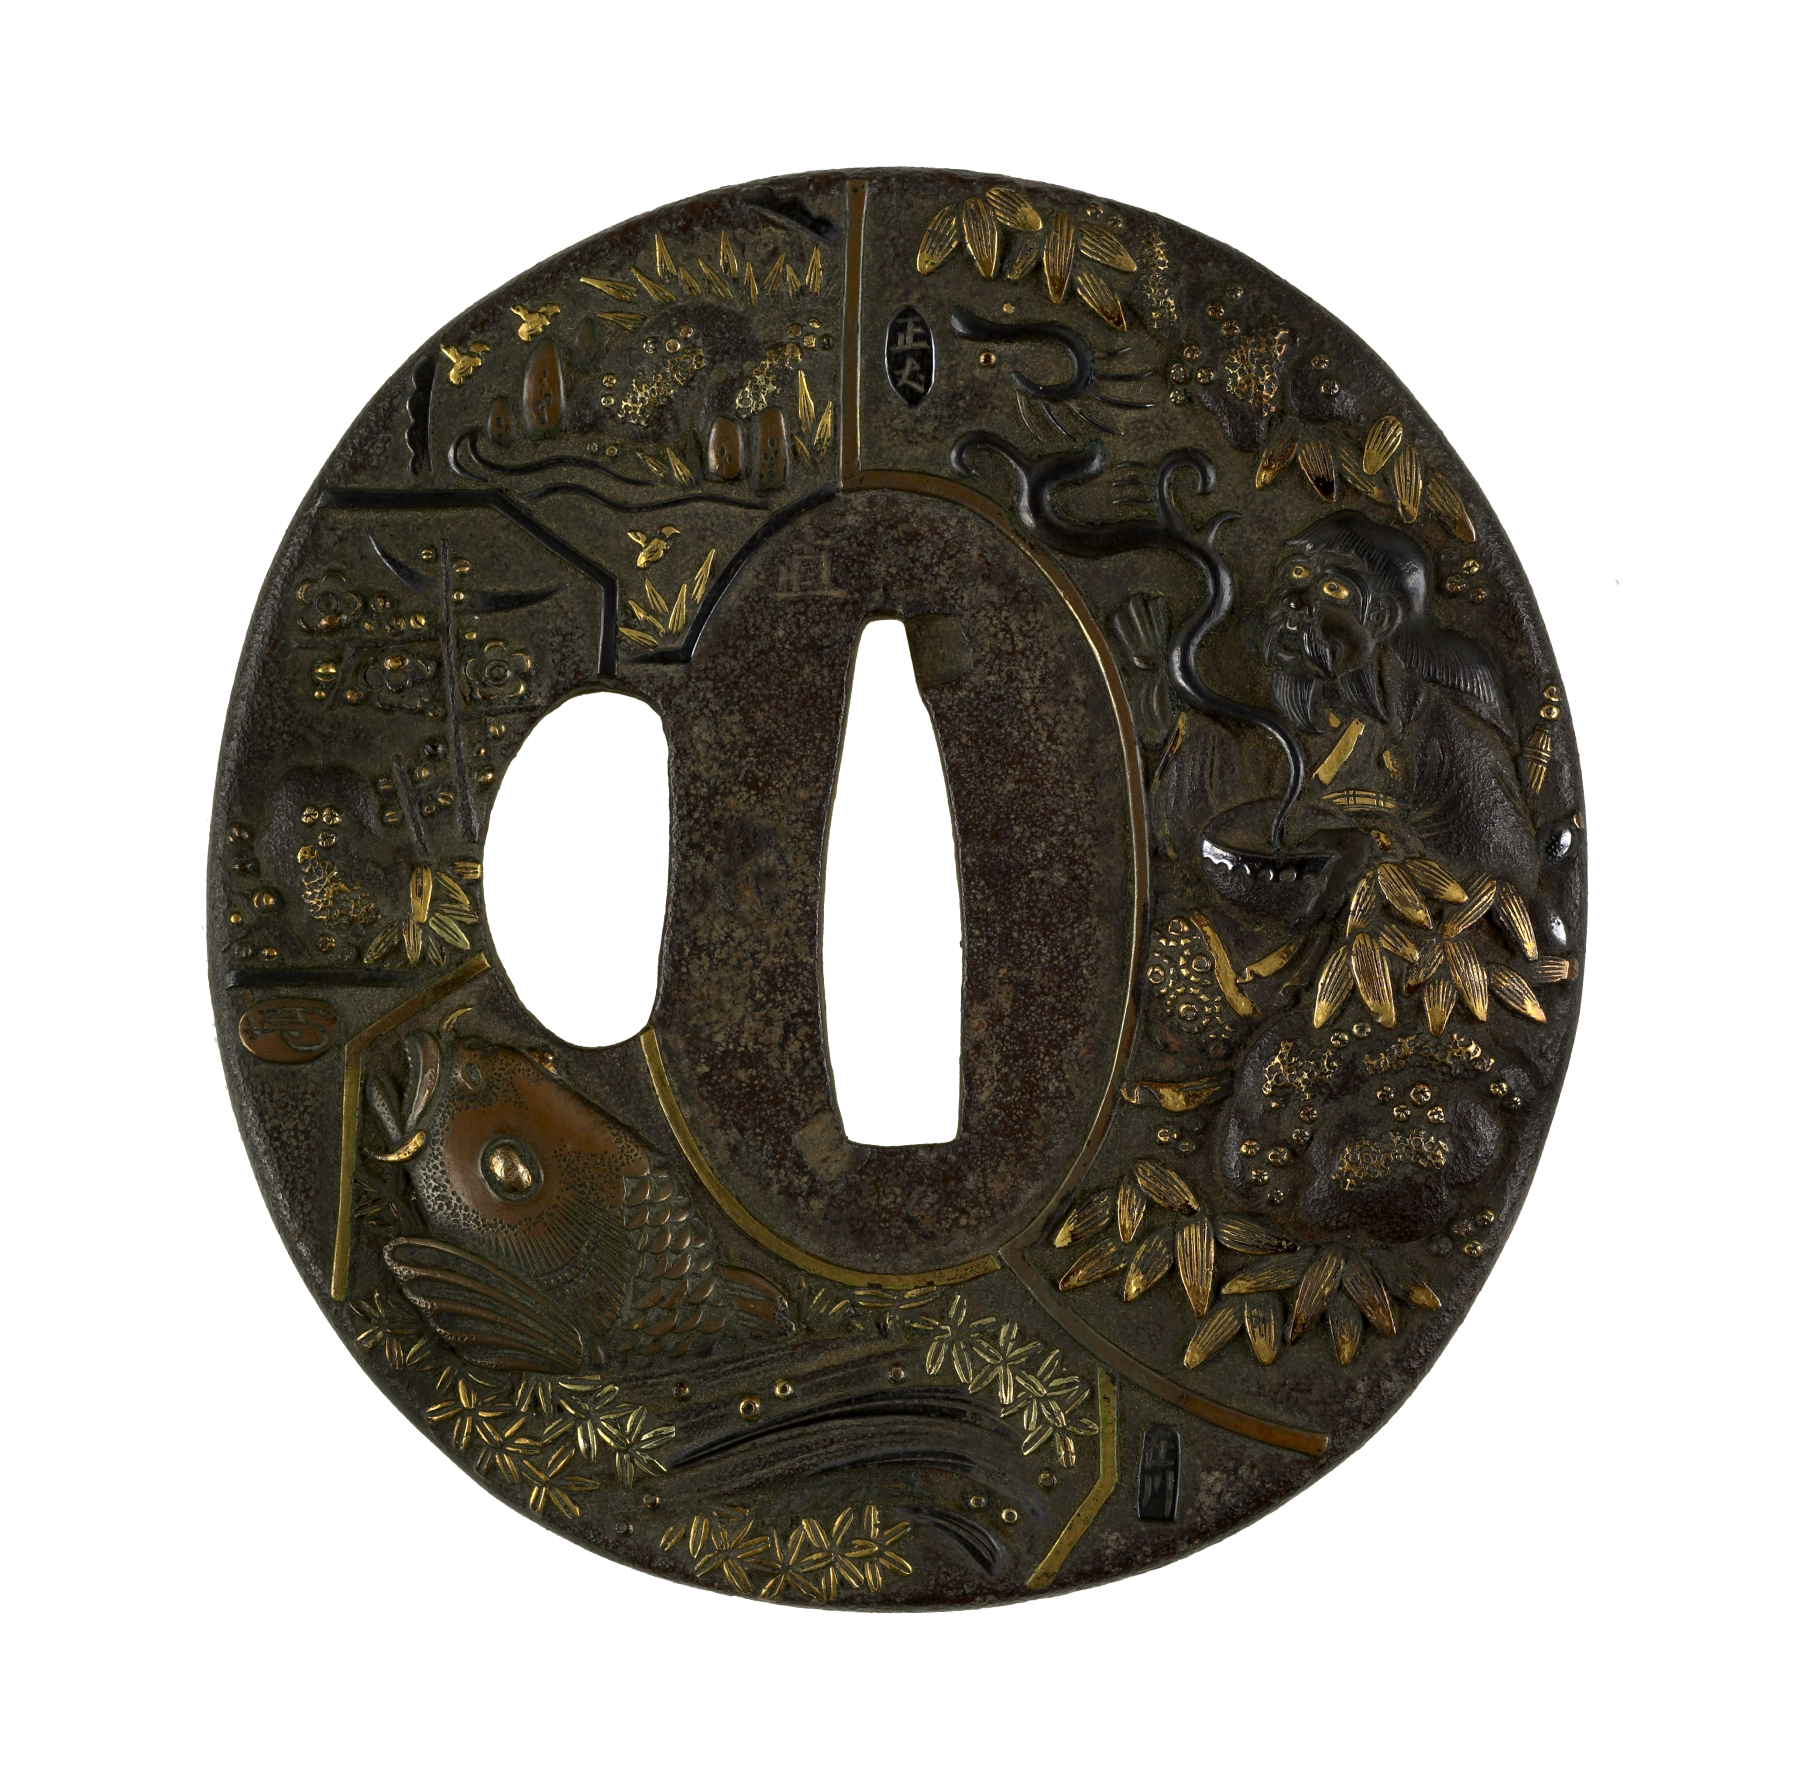 Image for Tsuba with Seven Scenes by Different Artists